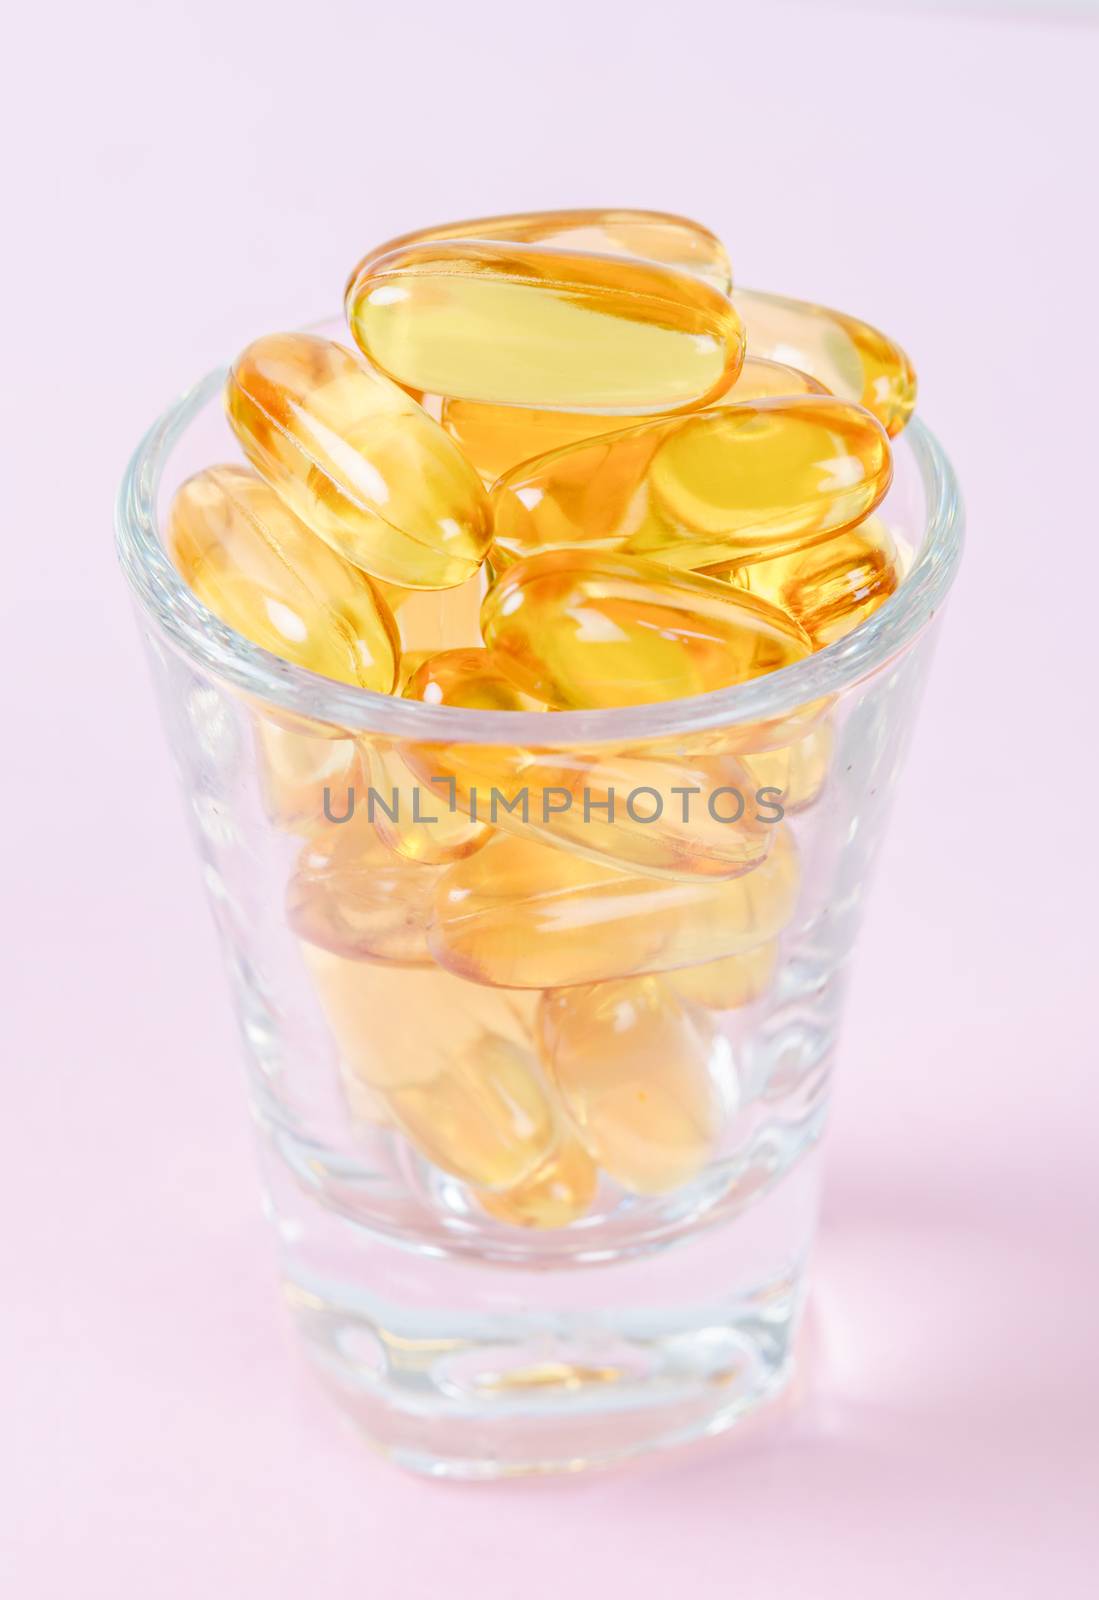 Fish oil capsules in glass on pink background.